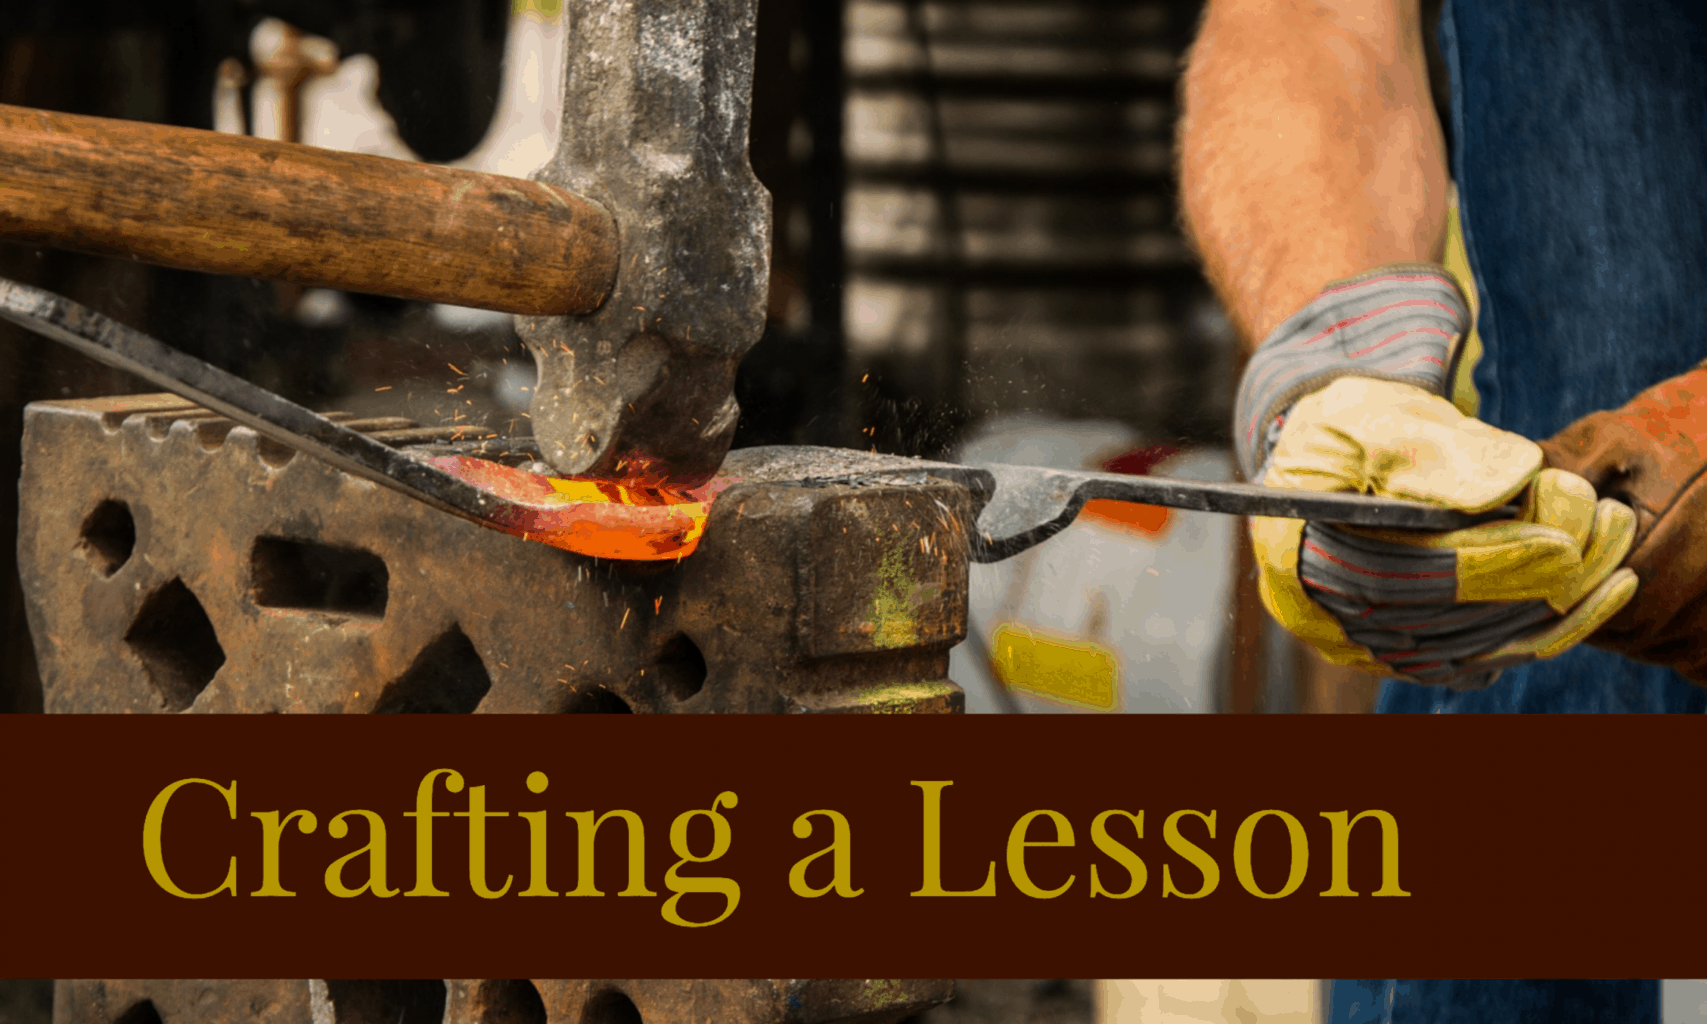 Crafting a Lesson